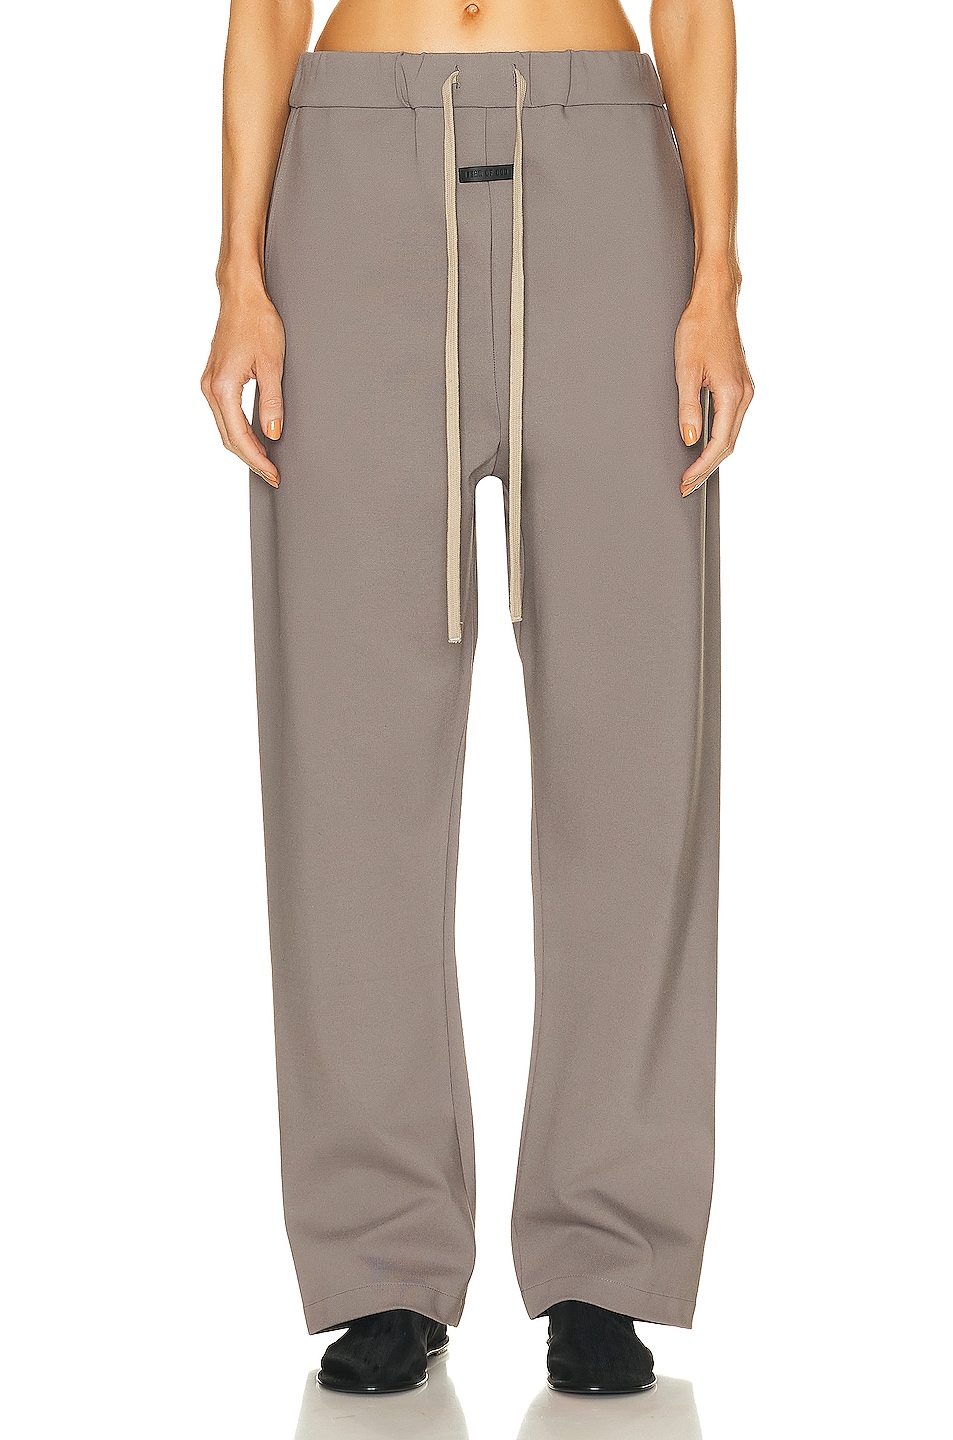 Image 1 of Fear of God Eternal Viscose Relaxed Pant in dusty concrete